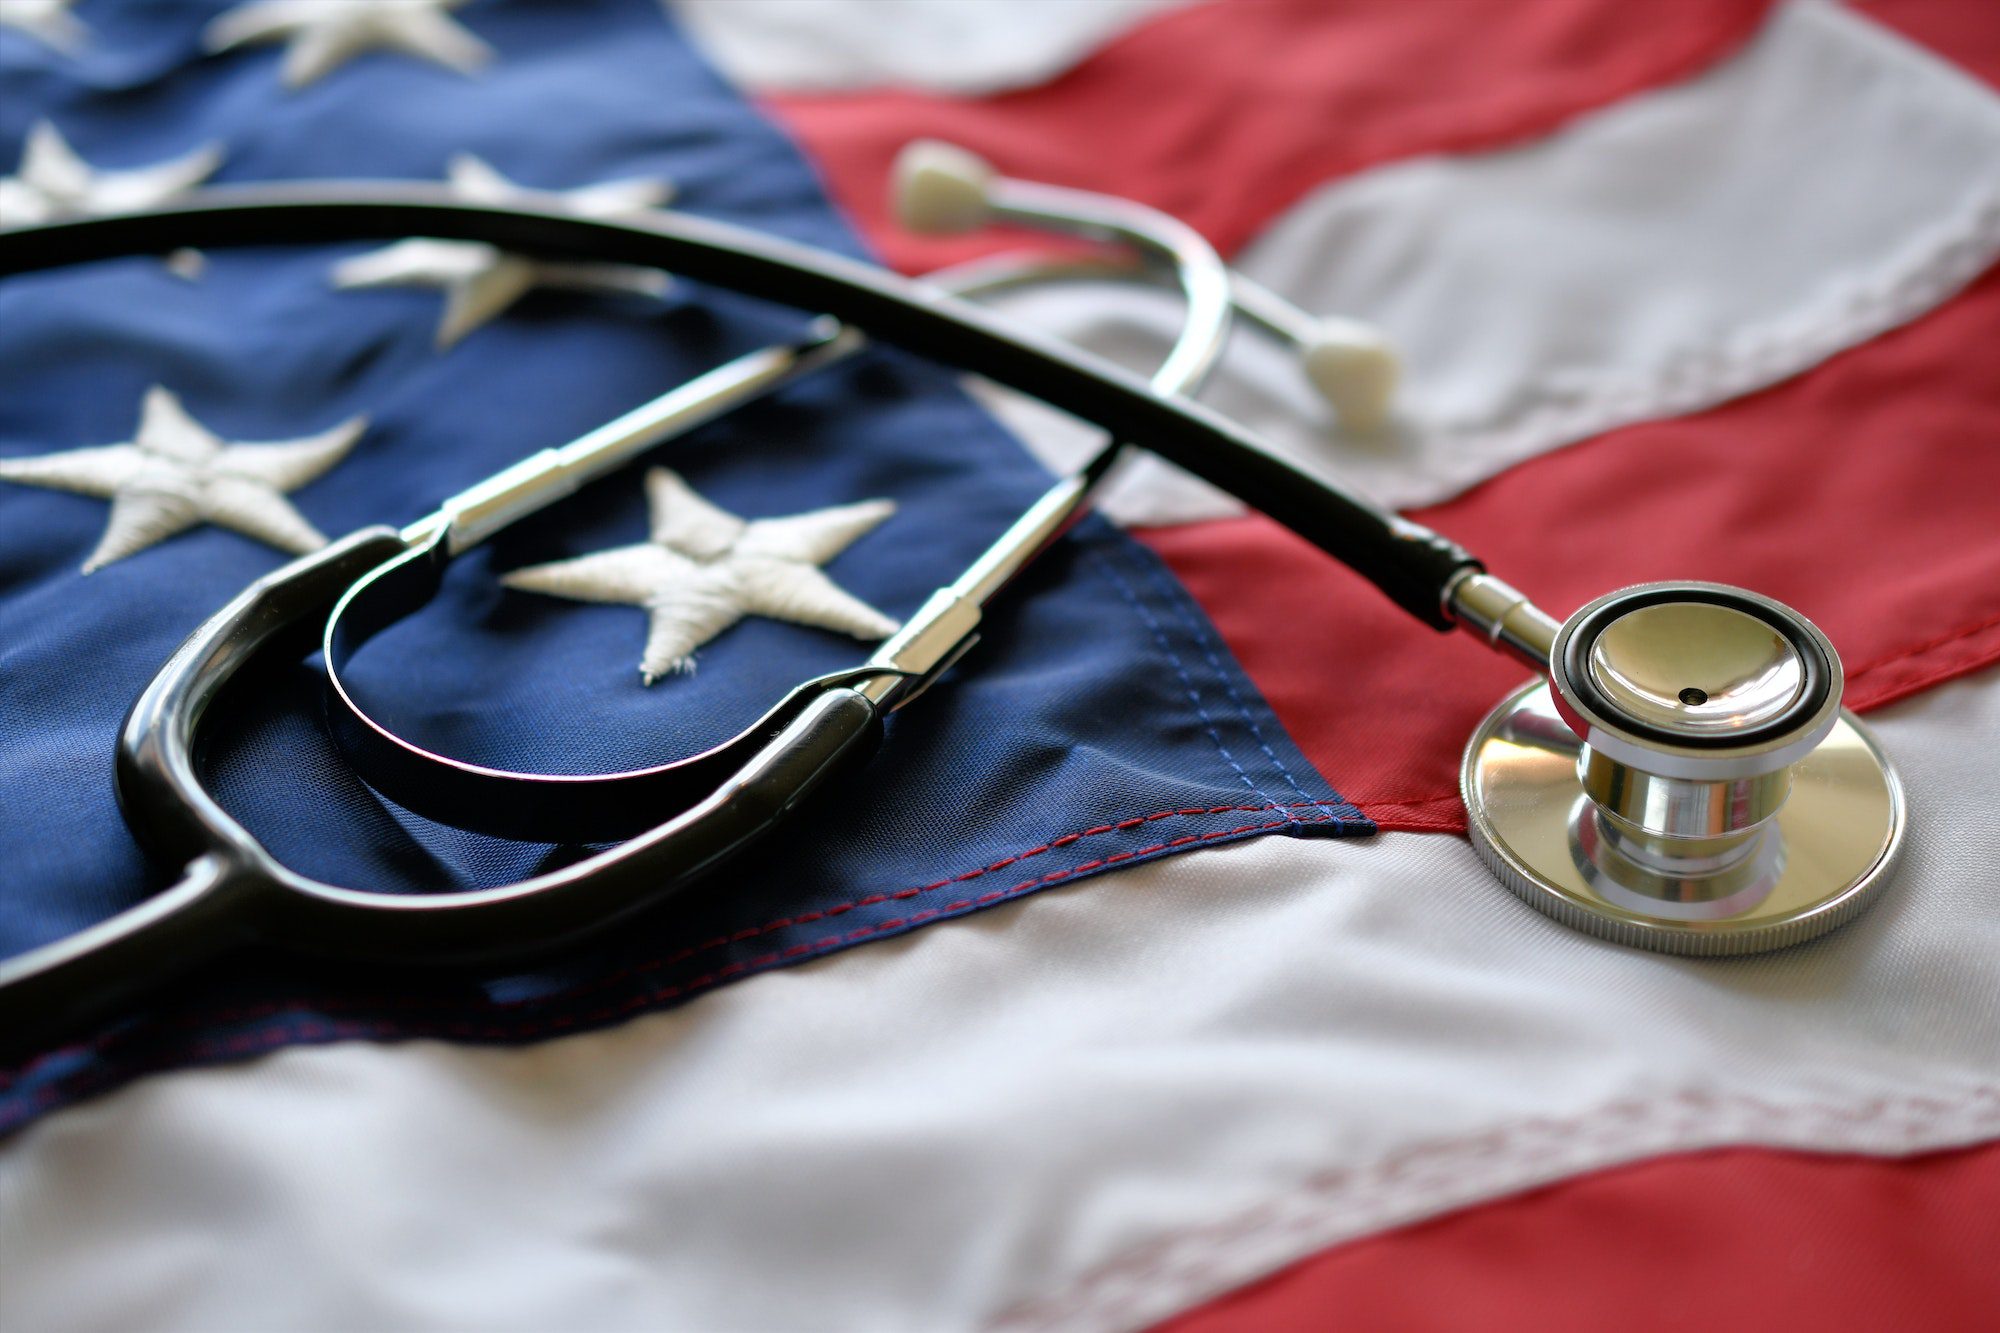 Tricare Pregnancy Coverage - What to Expect